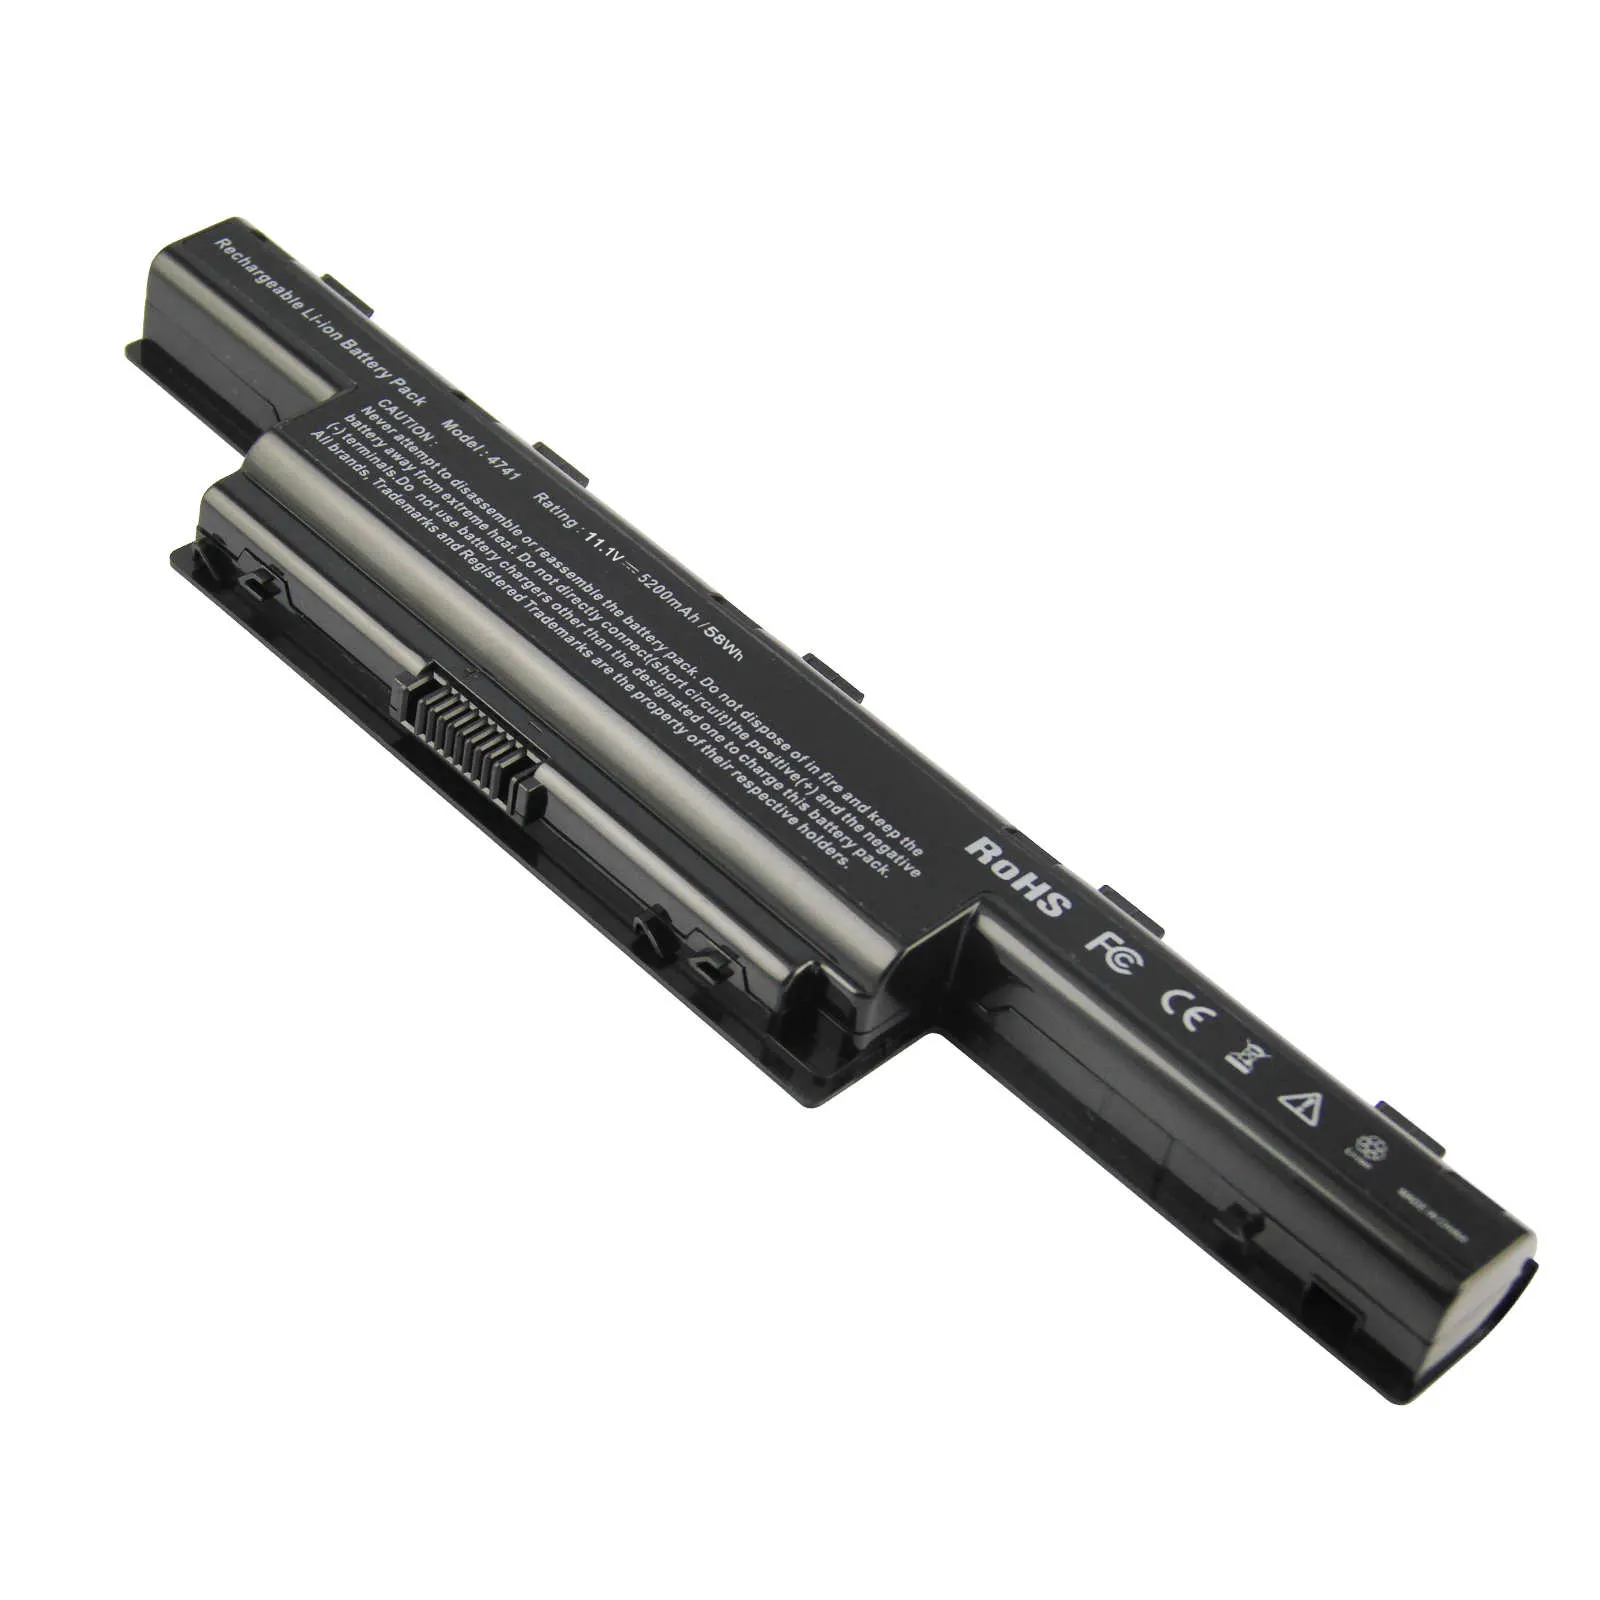 6 cells Replace laptop battery for Acer 4741 31CR19/652 AS10D31 Aspire 4771 4771G AS10D31 AS10D3E AS10D41 AS10D61 AS10D71